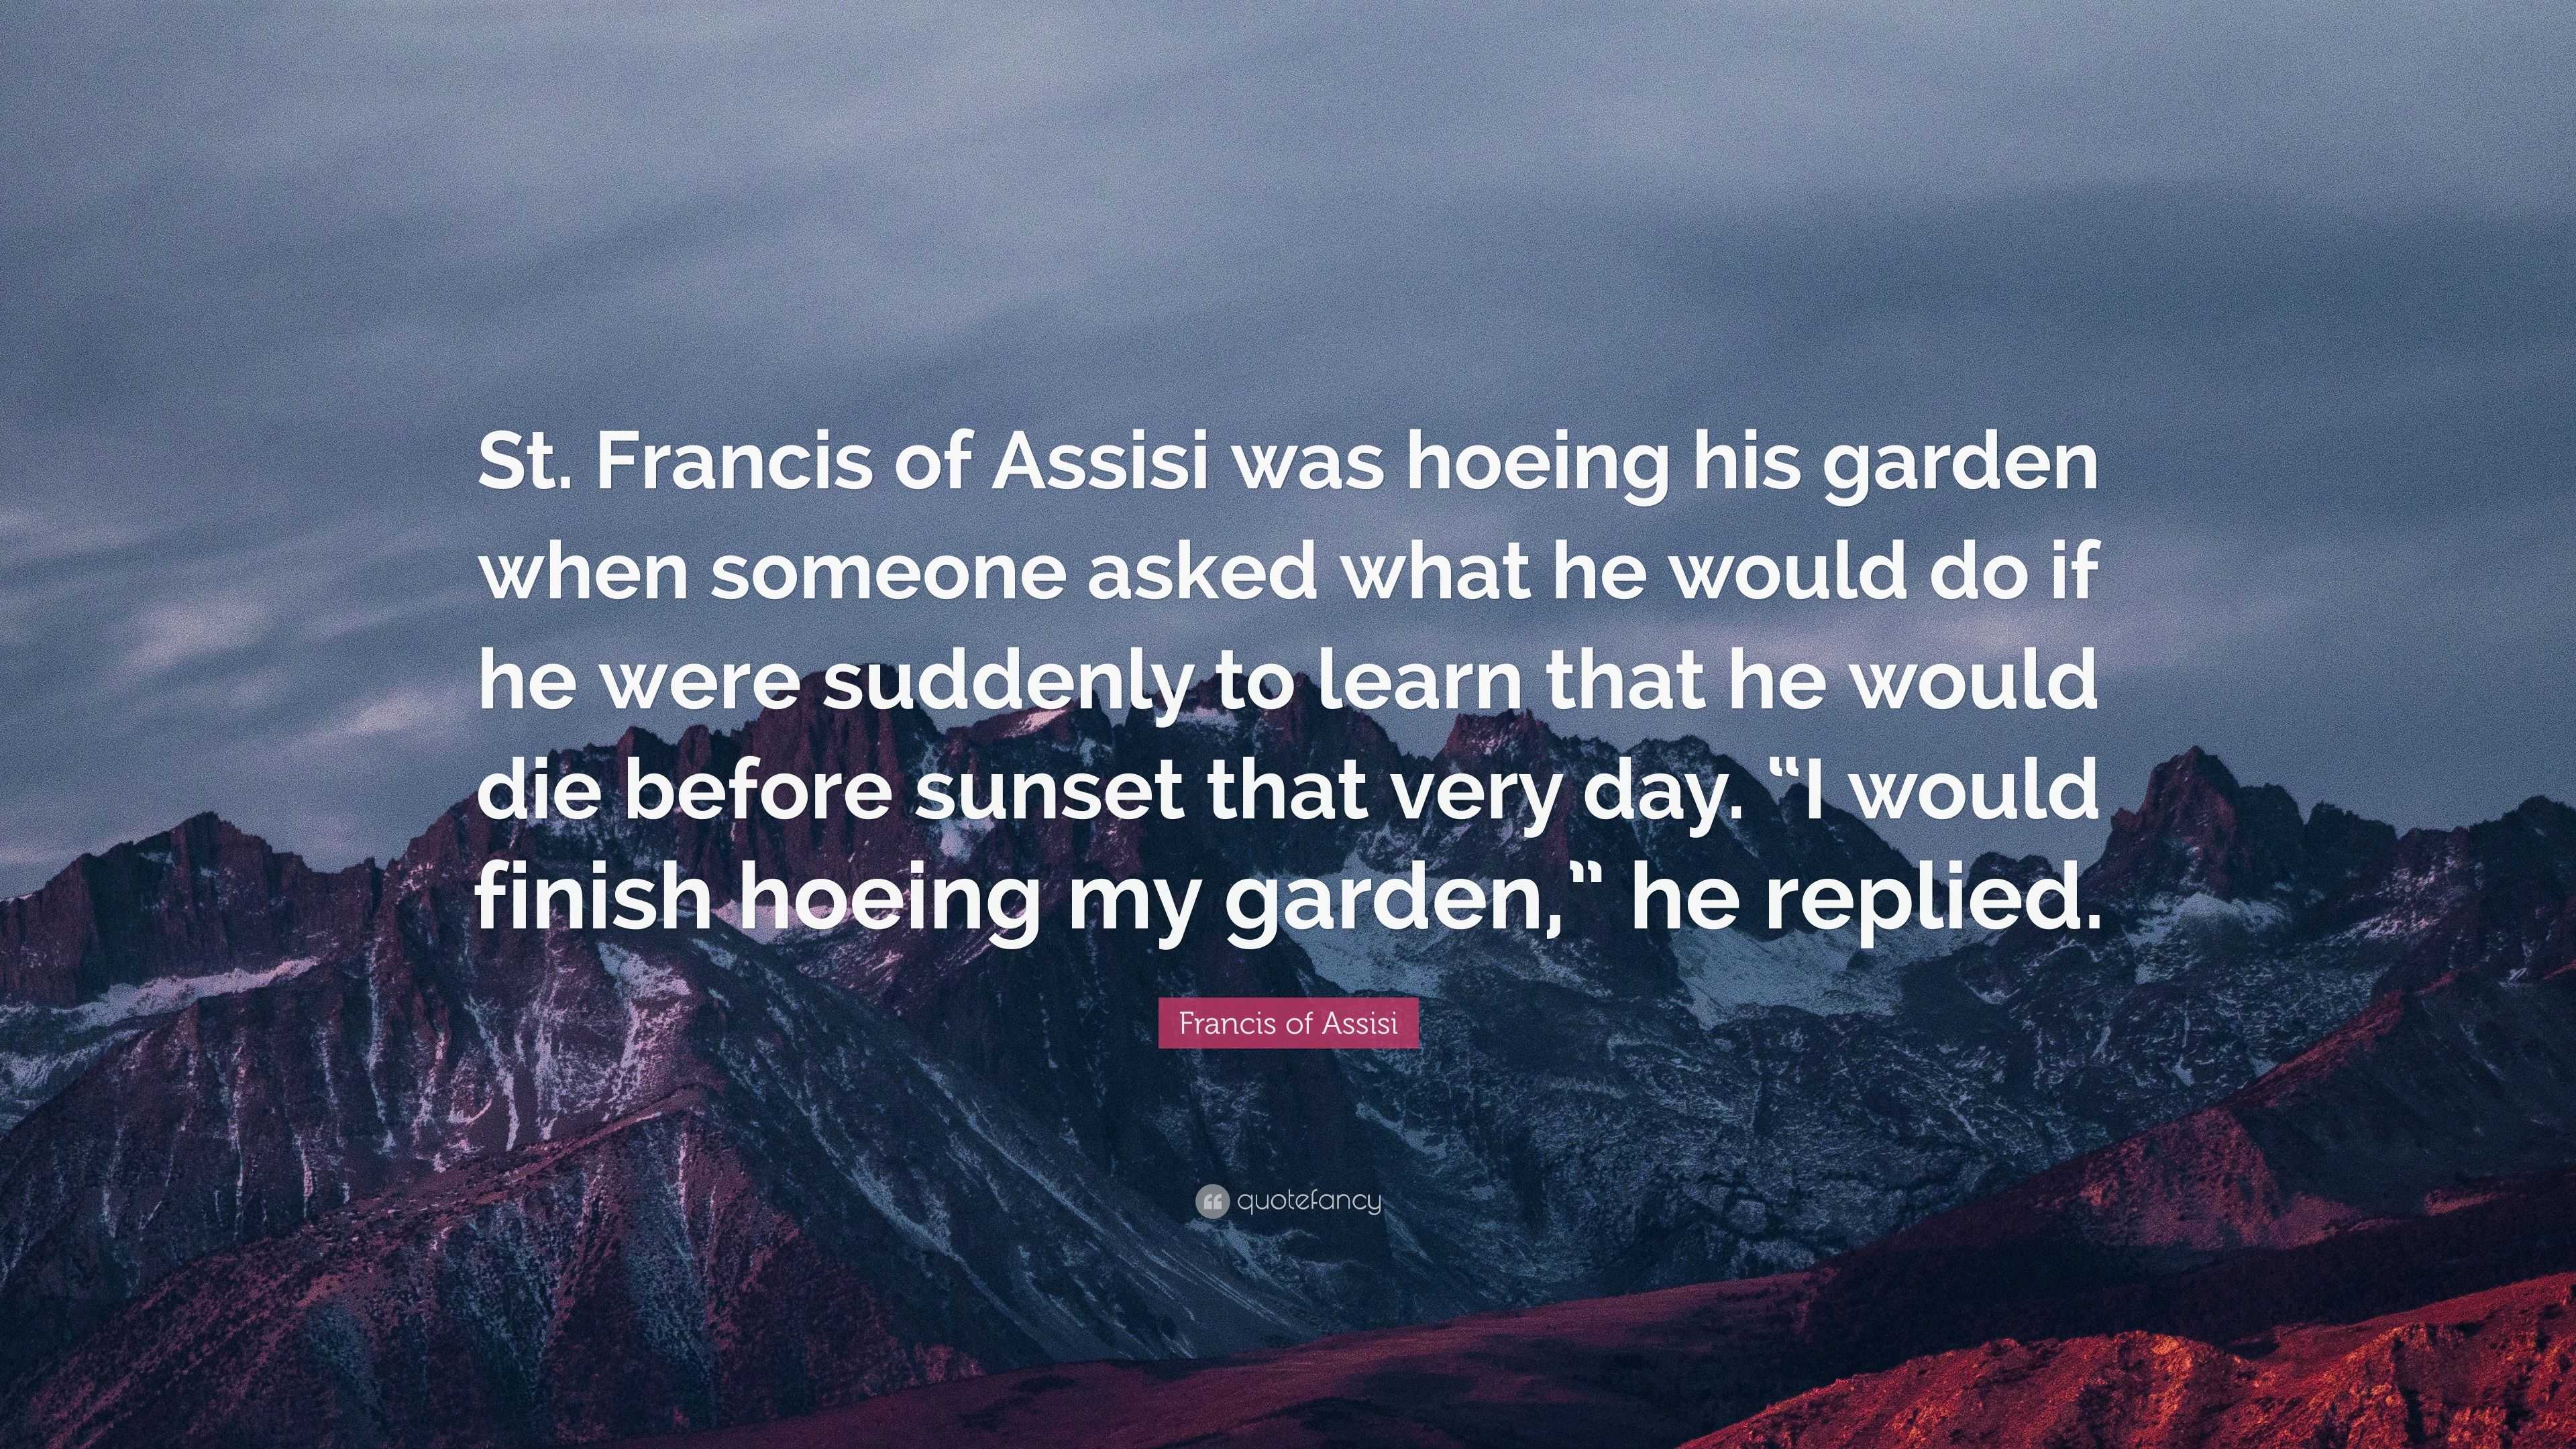 Francis of Assisi Quote: “St. Francis of Assisi was hoeing his garden